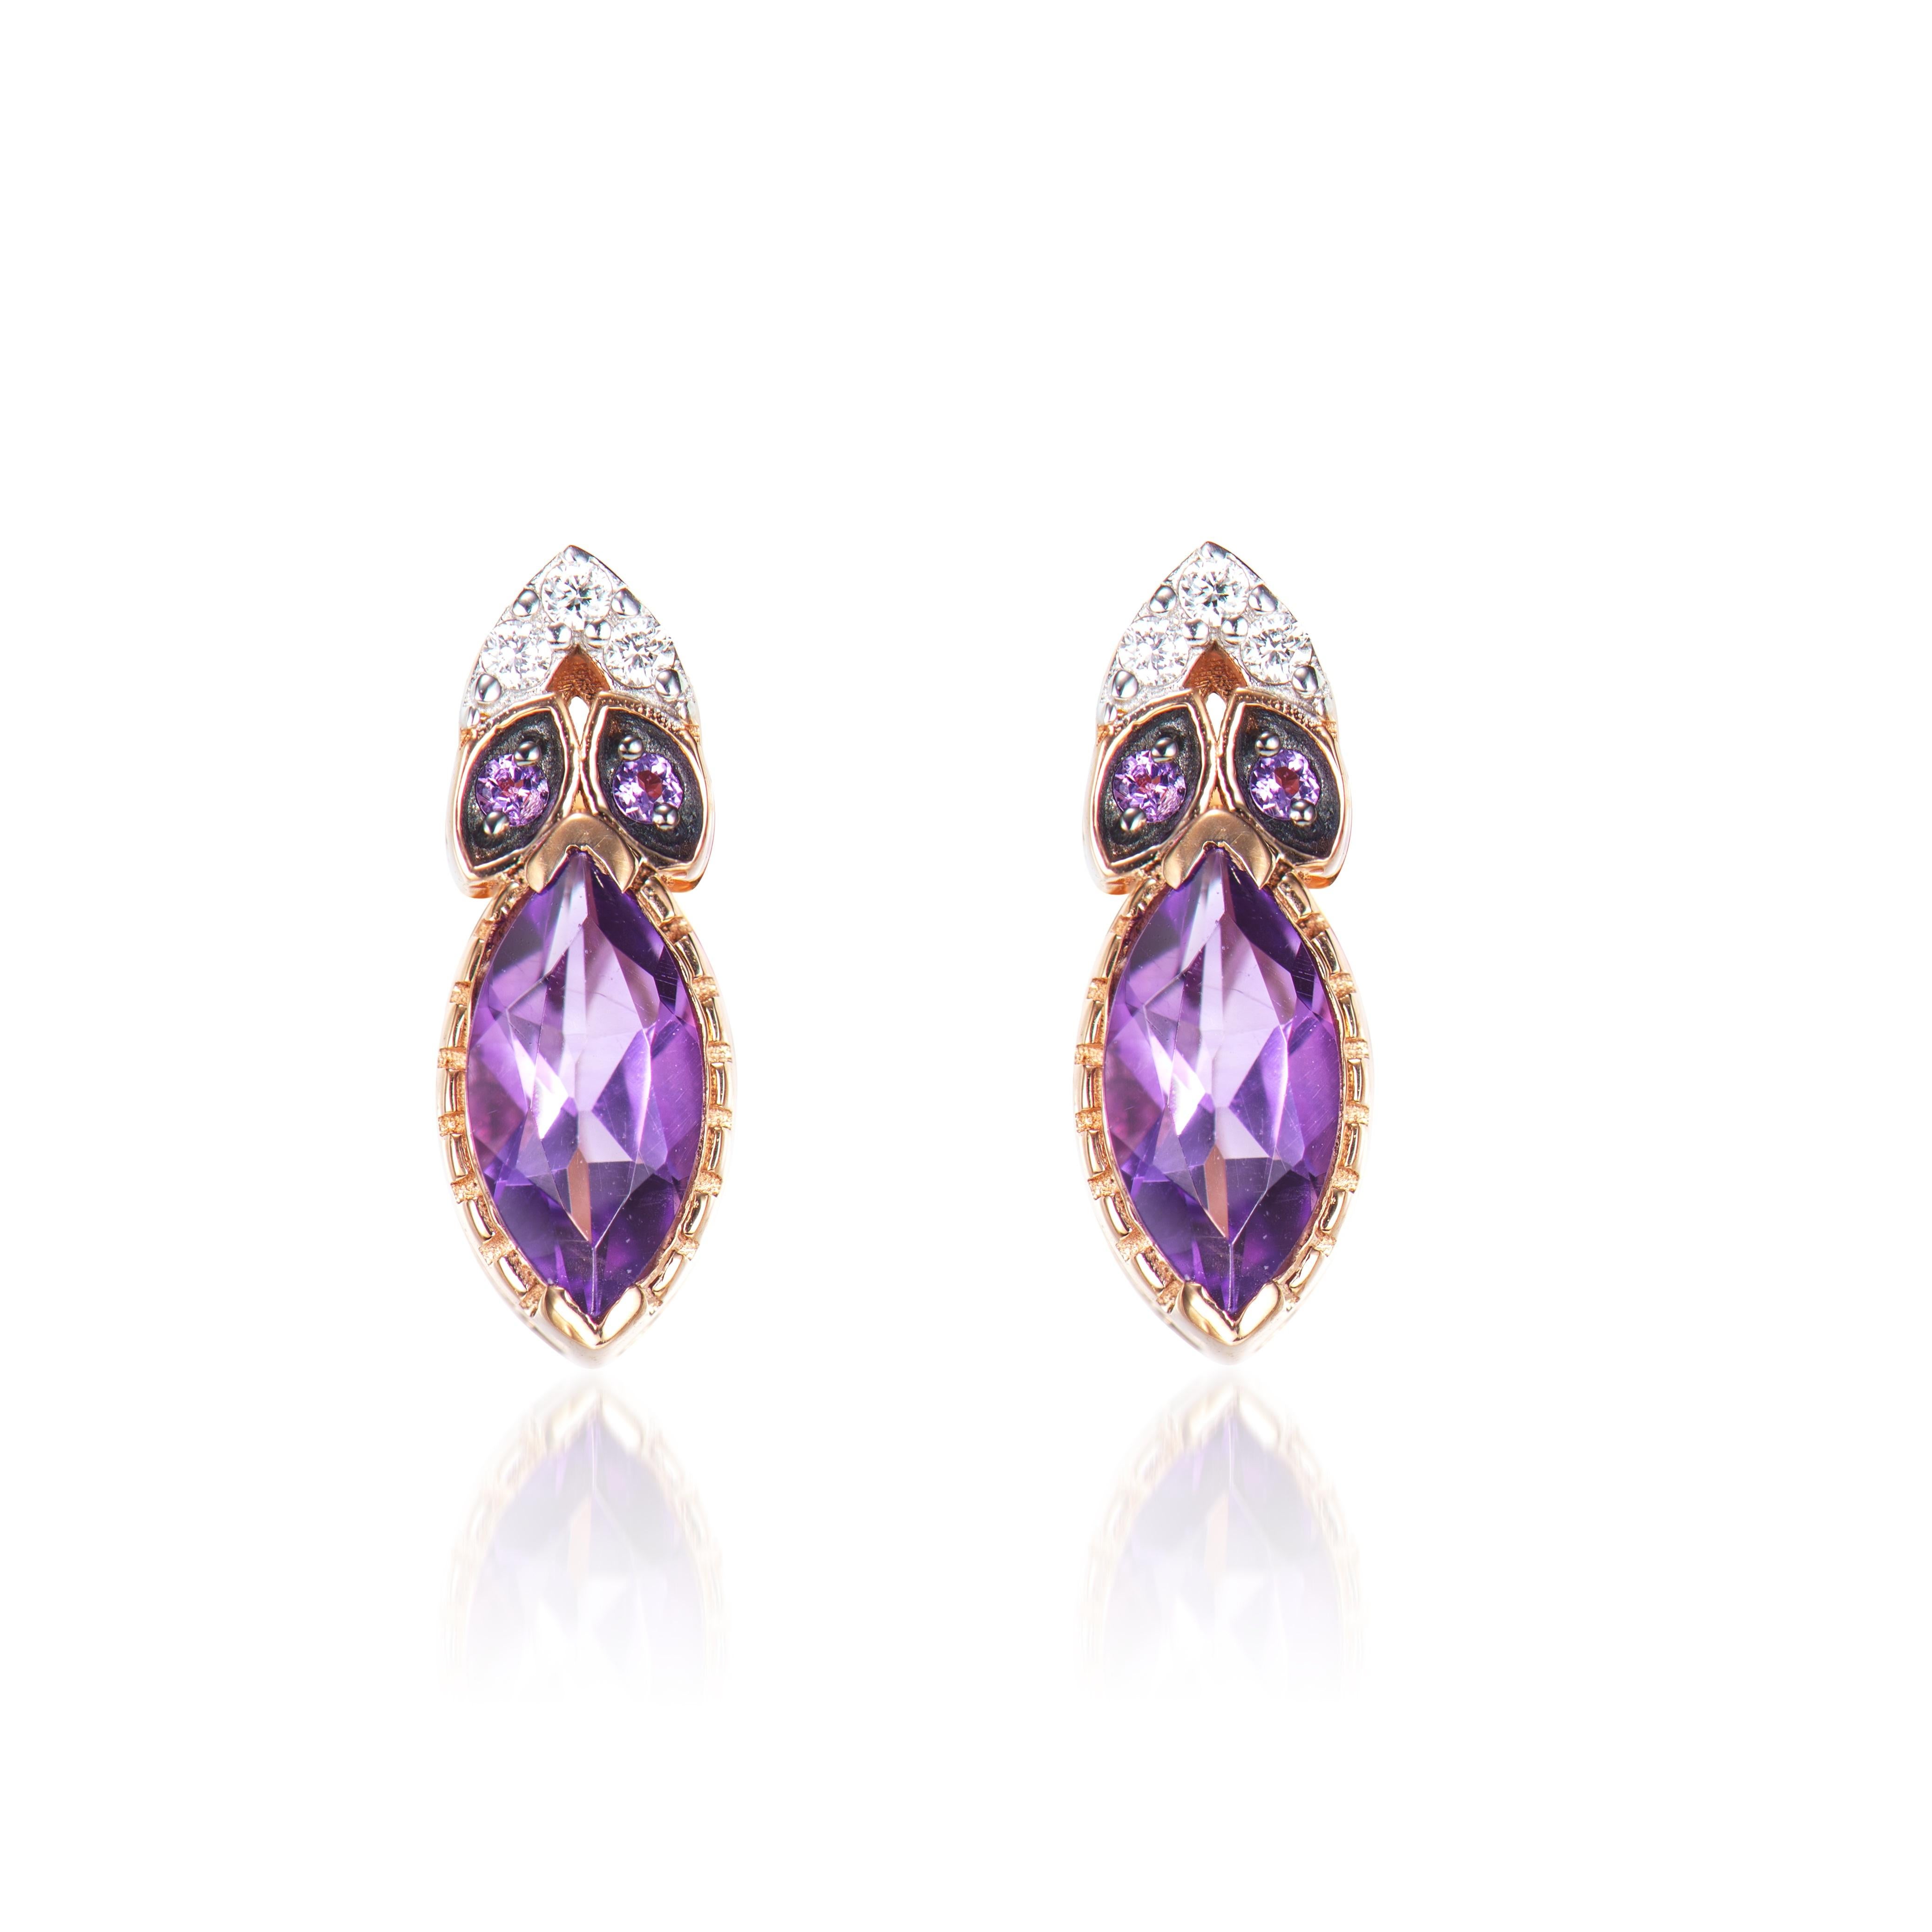 Contemporary 0.90 Carat Amethyst Stud Earrings in 14Karat Rose Gold with White Diamond. For Sale